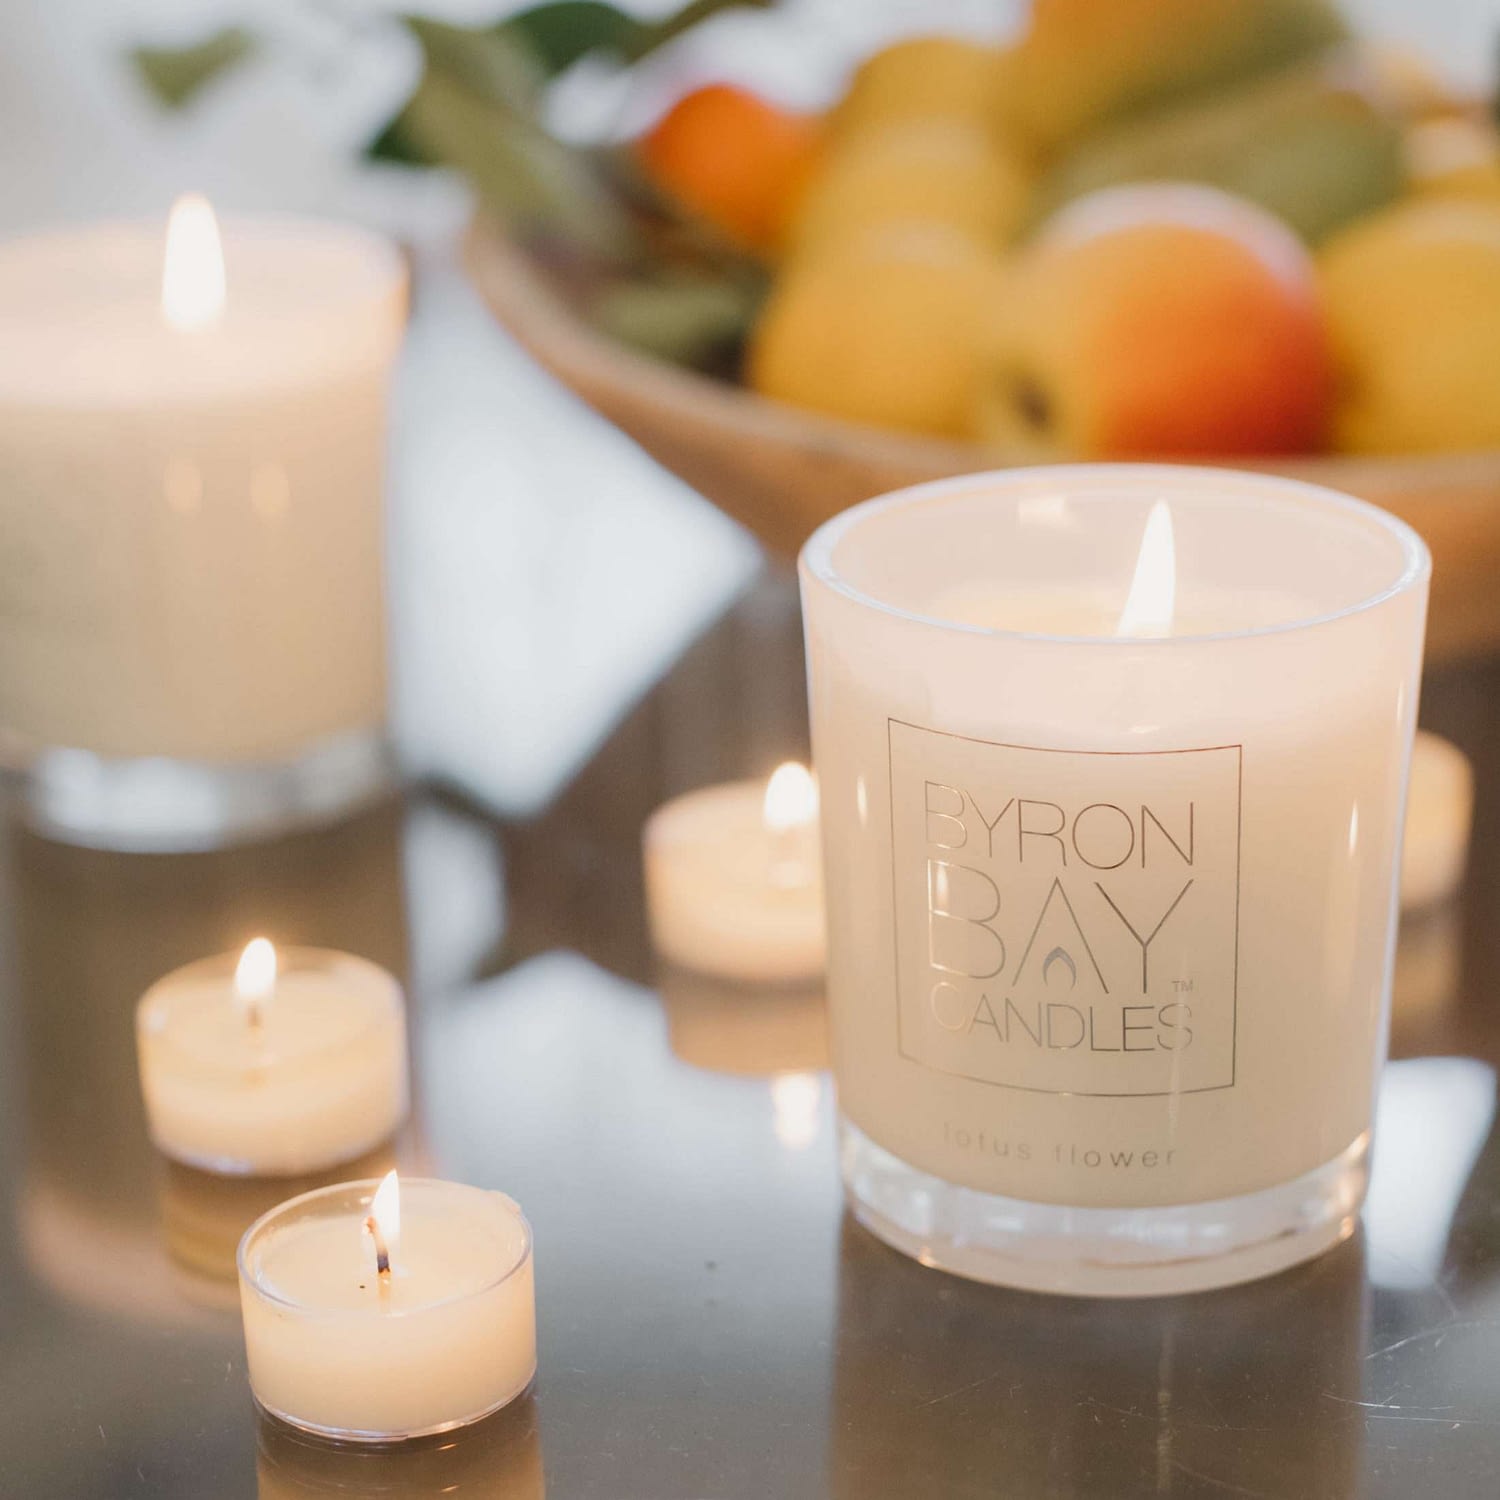 pure-soy-candles-byron-bay-candles